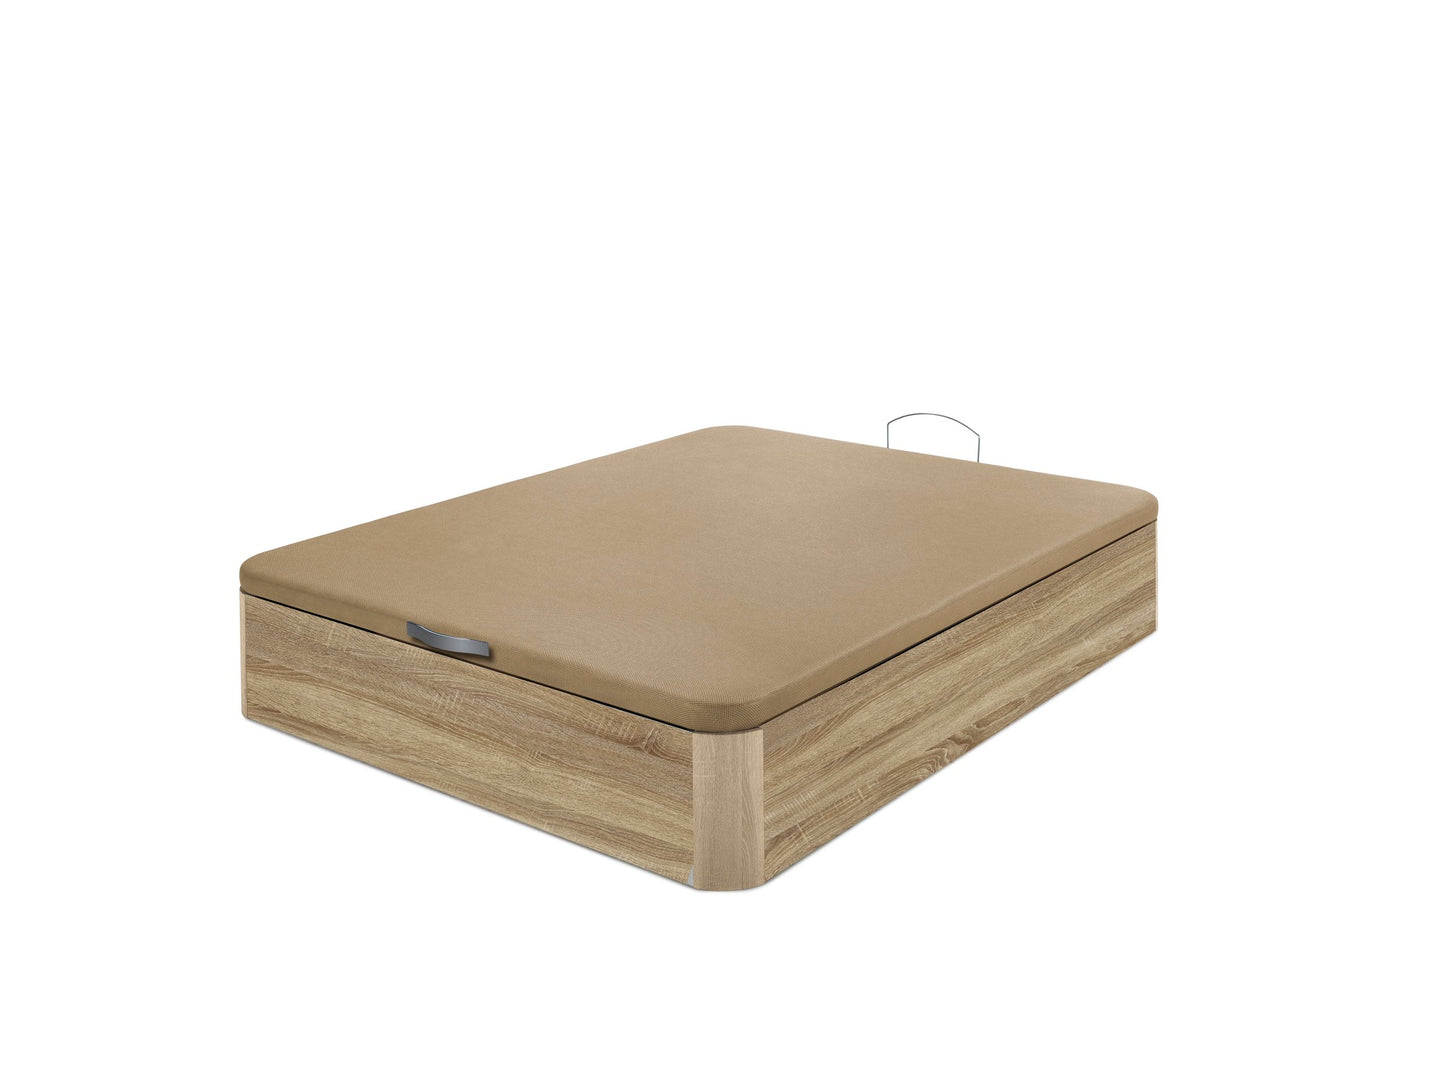 Generation Z Wooden Canapé and Mattress Pack | OAK